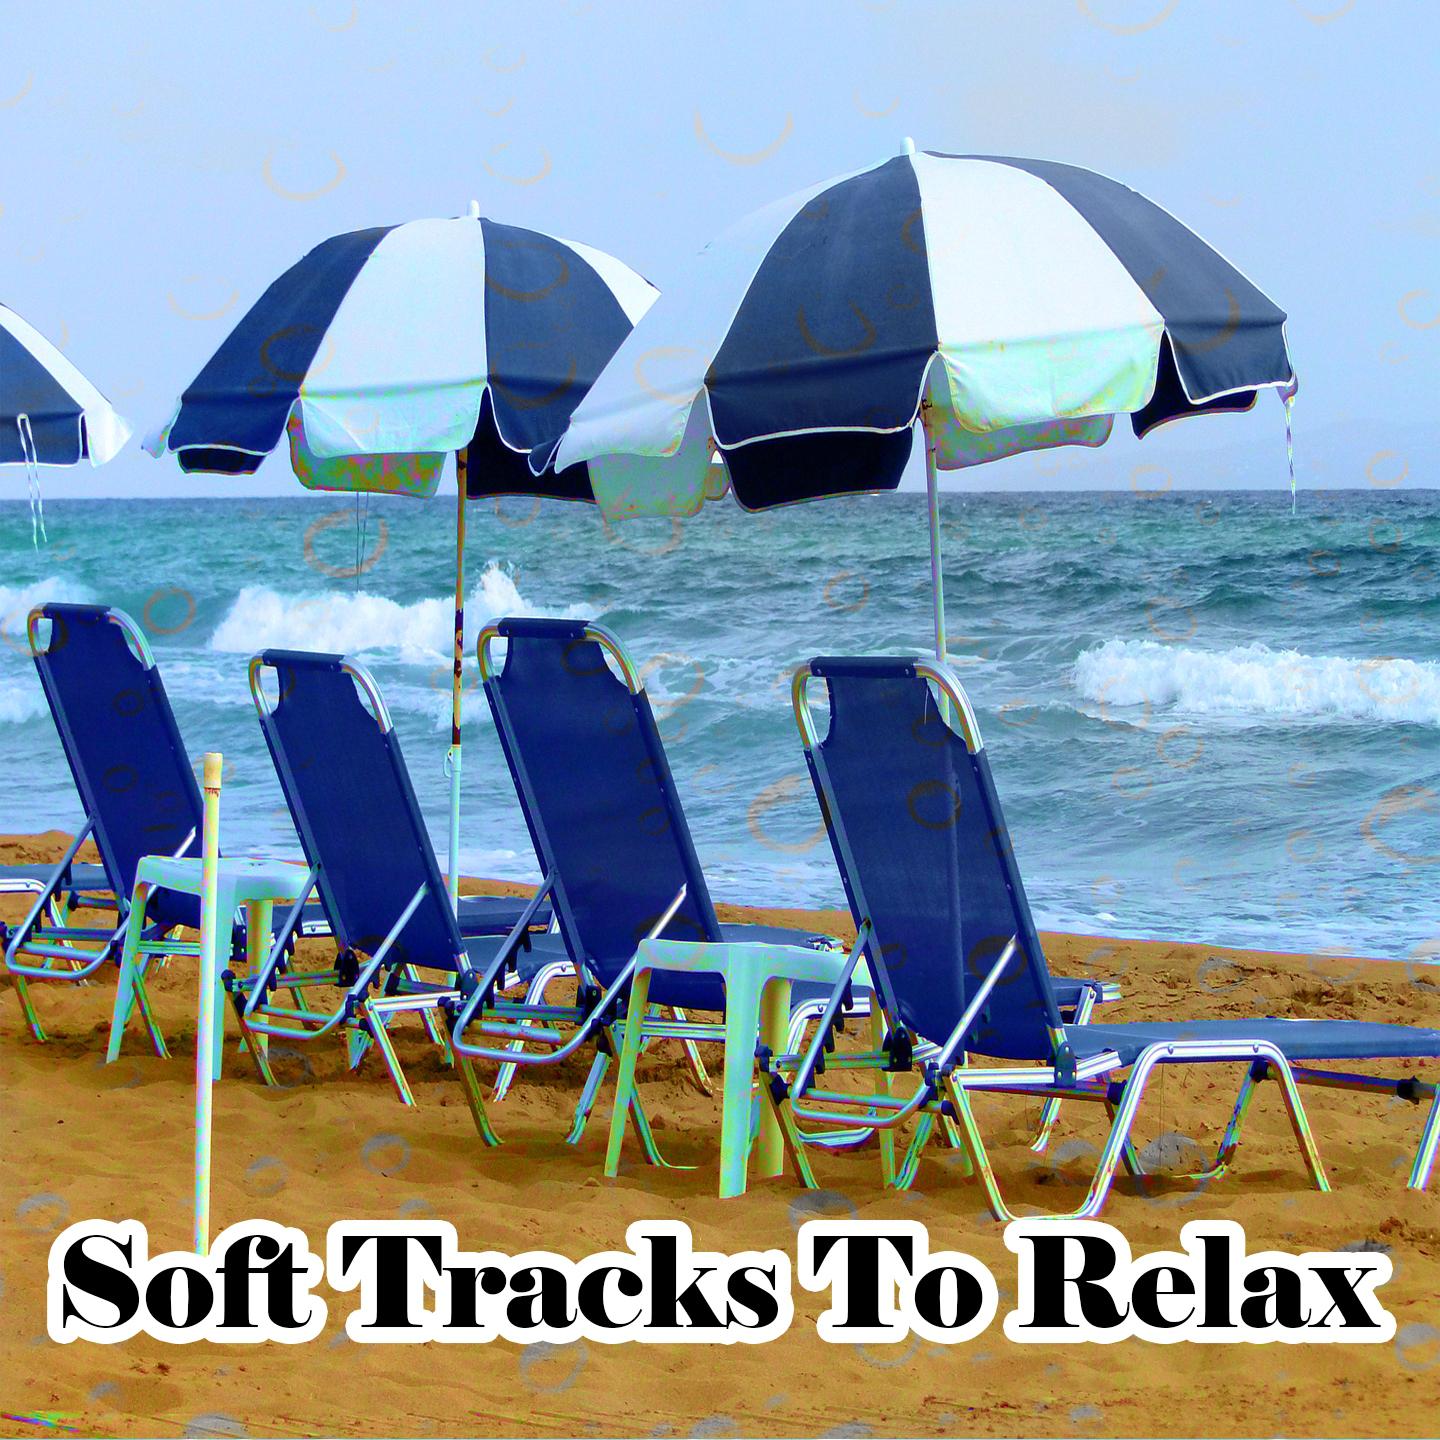 Soft Tracks To Relax